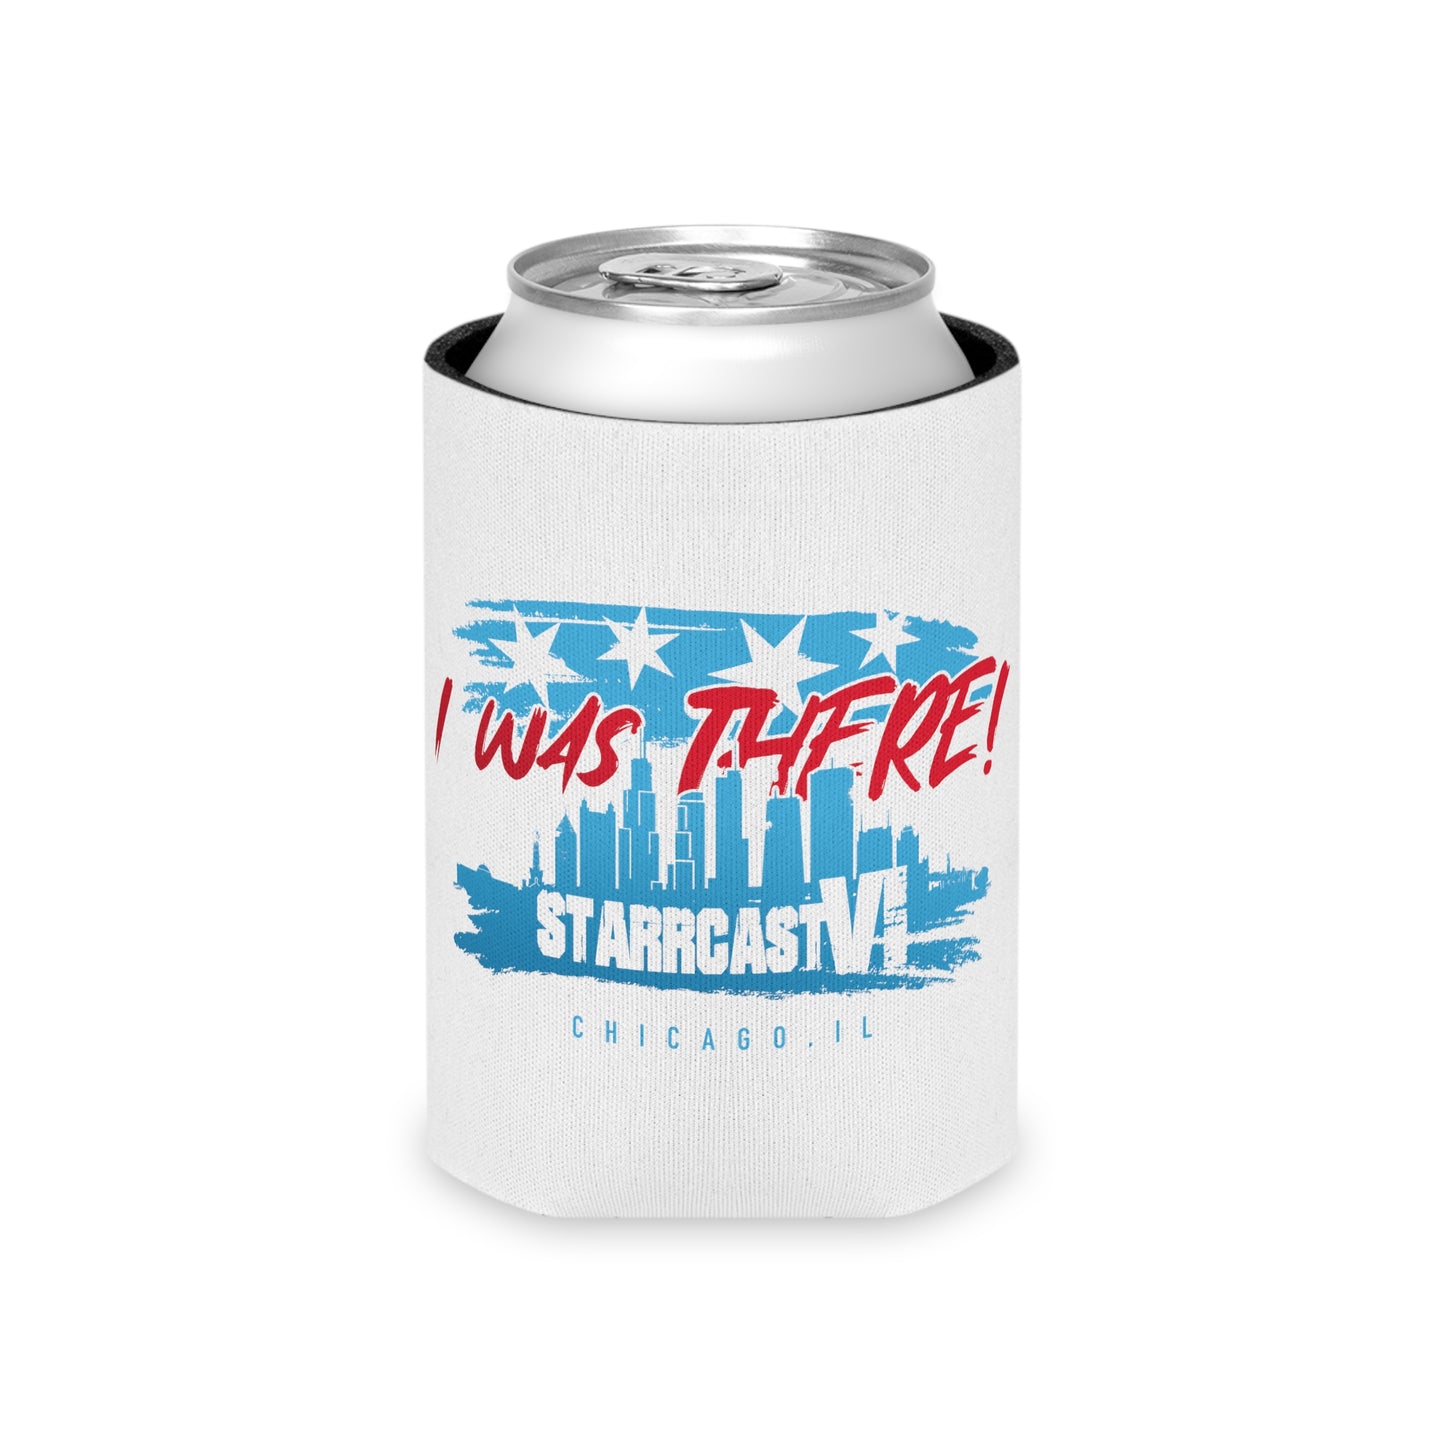 Starrcast VI "I Was There" White - Can Cooler